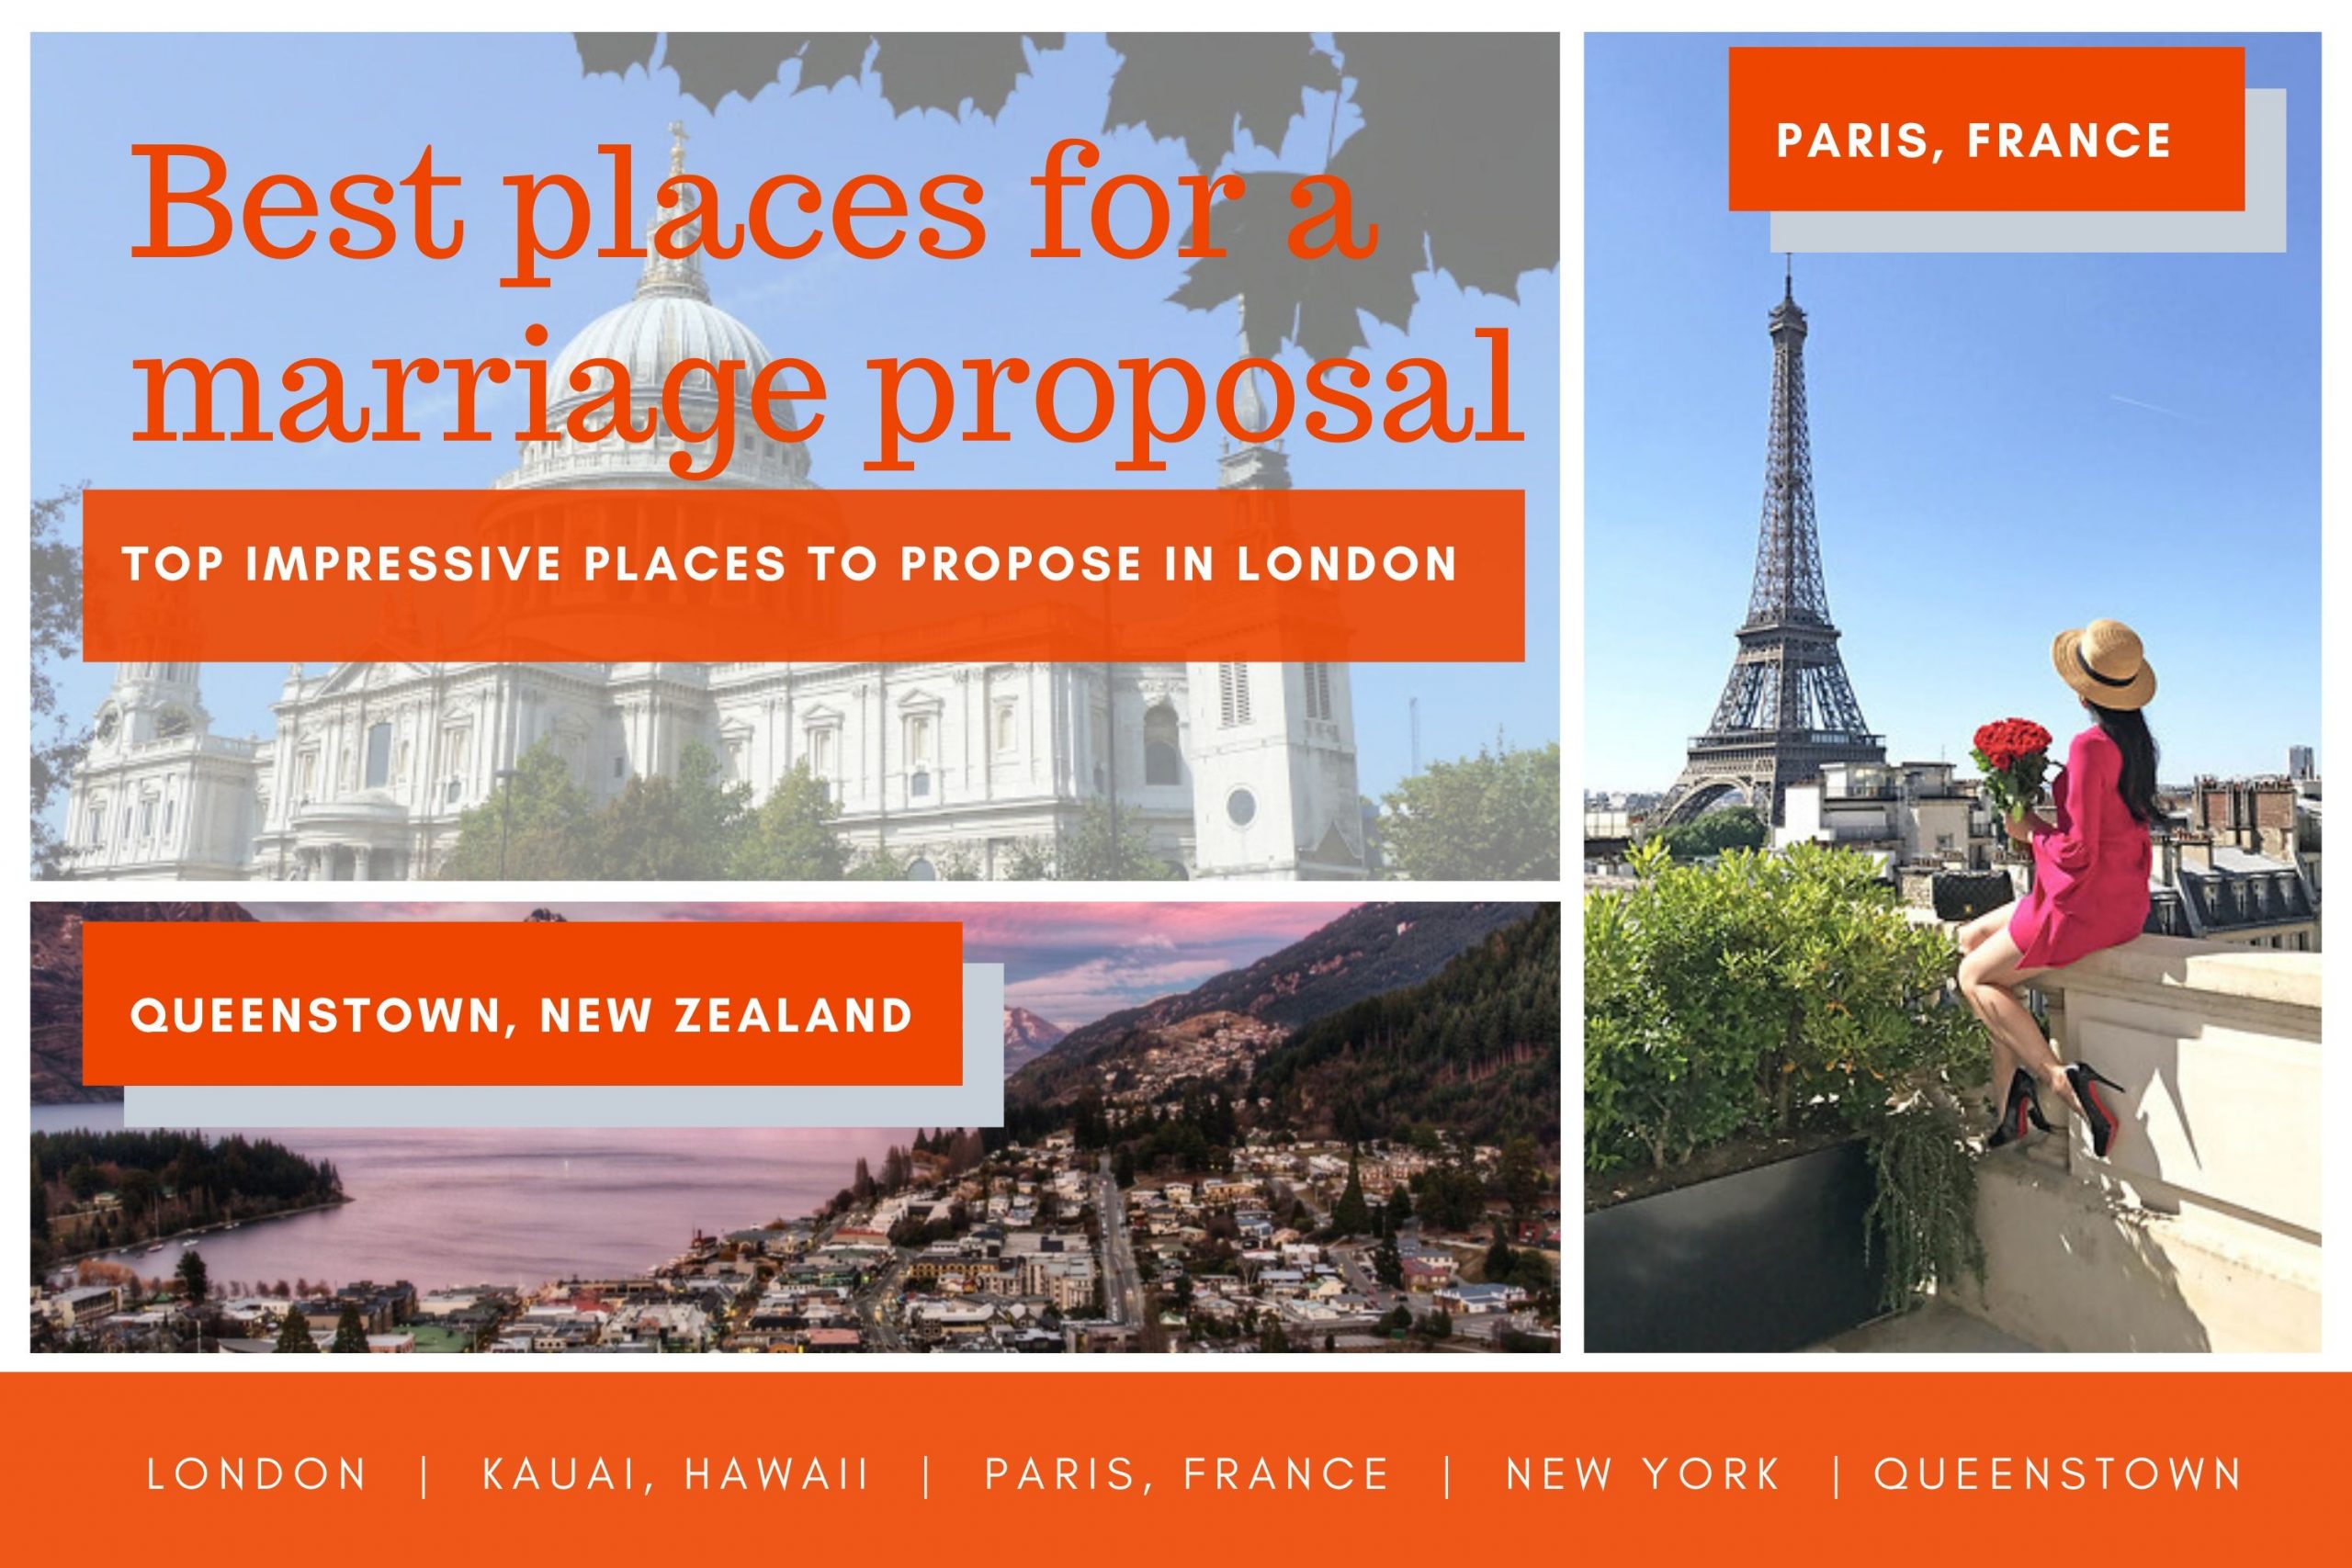 Best places for a marriage proposal